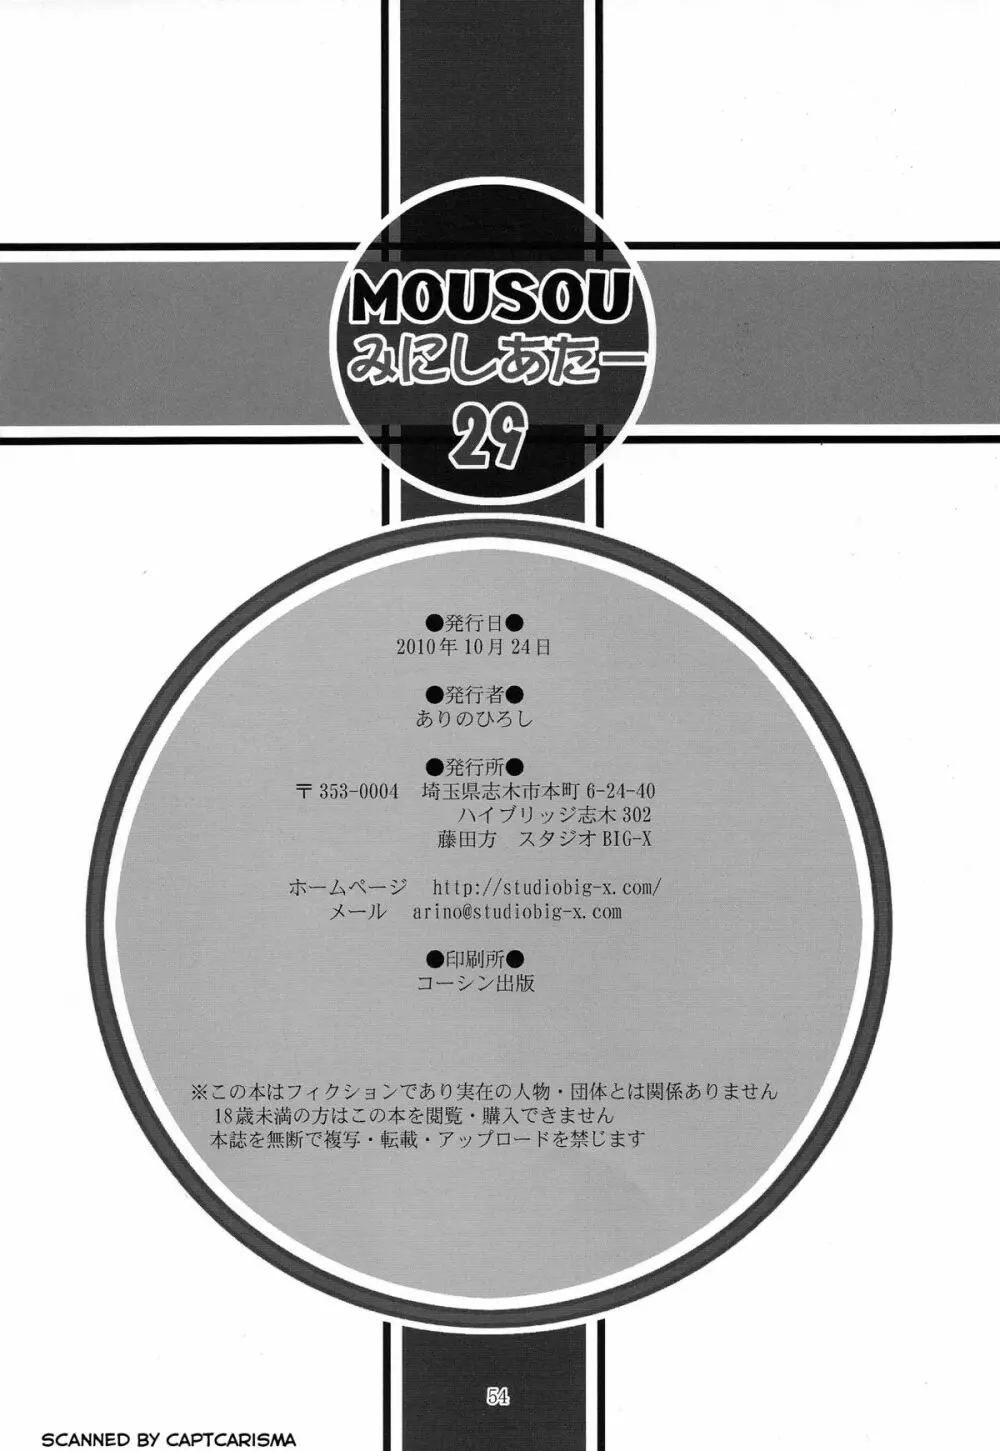 MOUSOU THEATER 29 54ページ